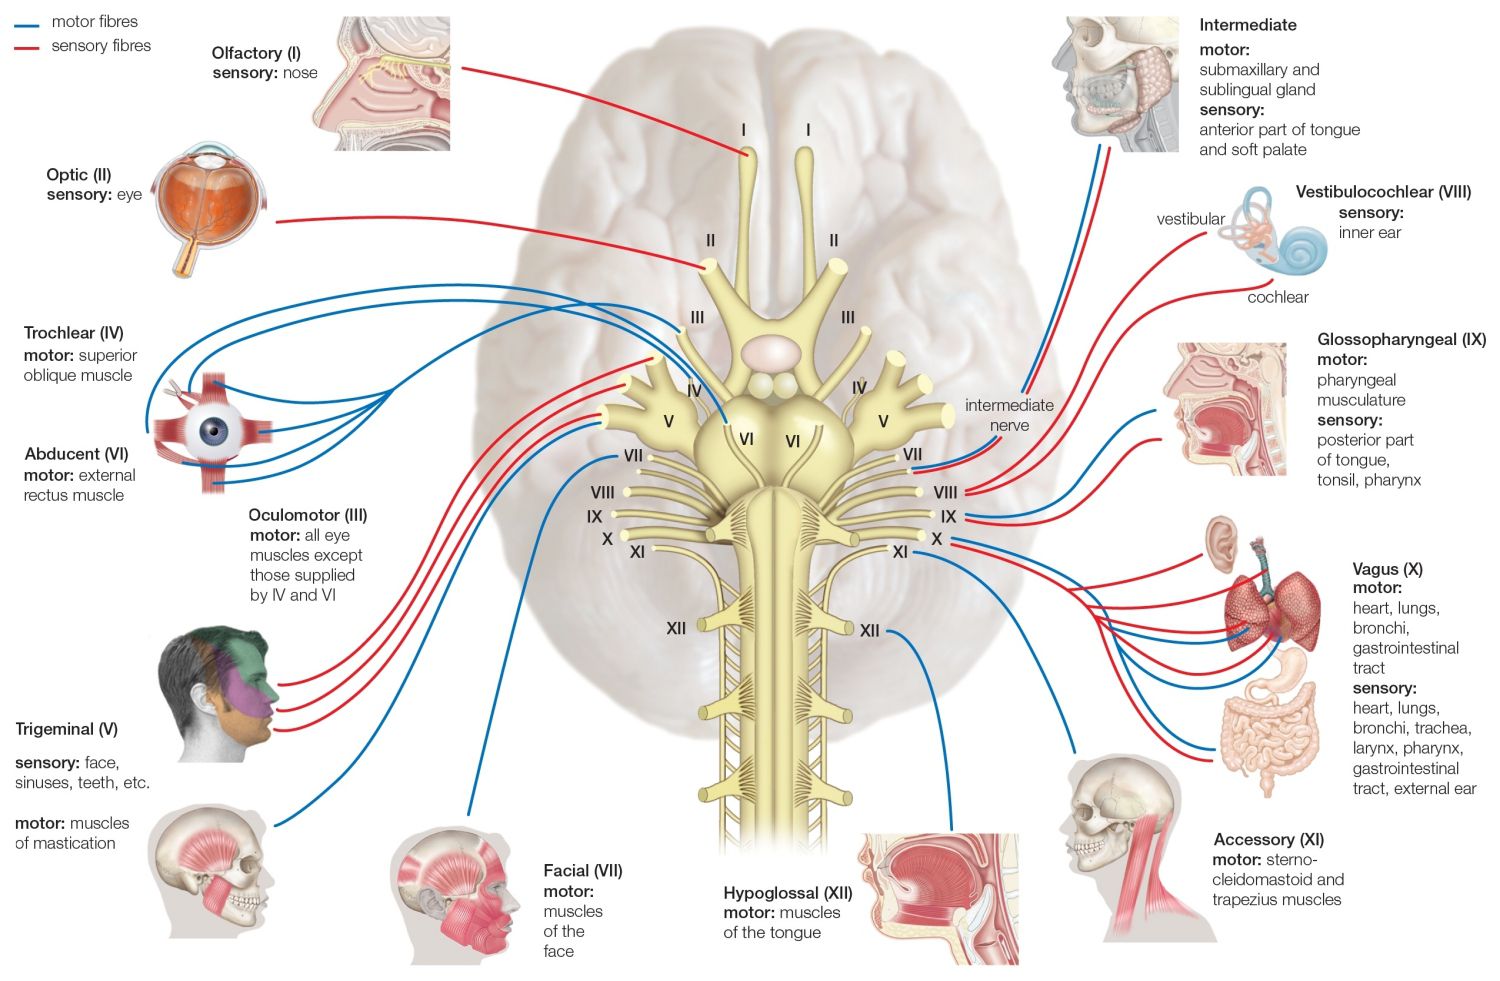 names-functions-and-locations-of-cranial-nerves